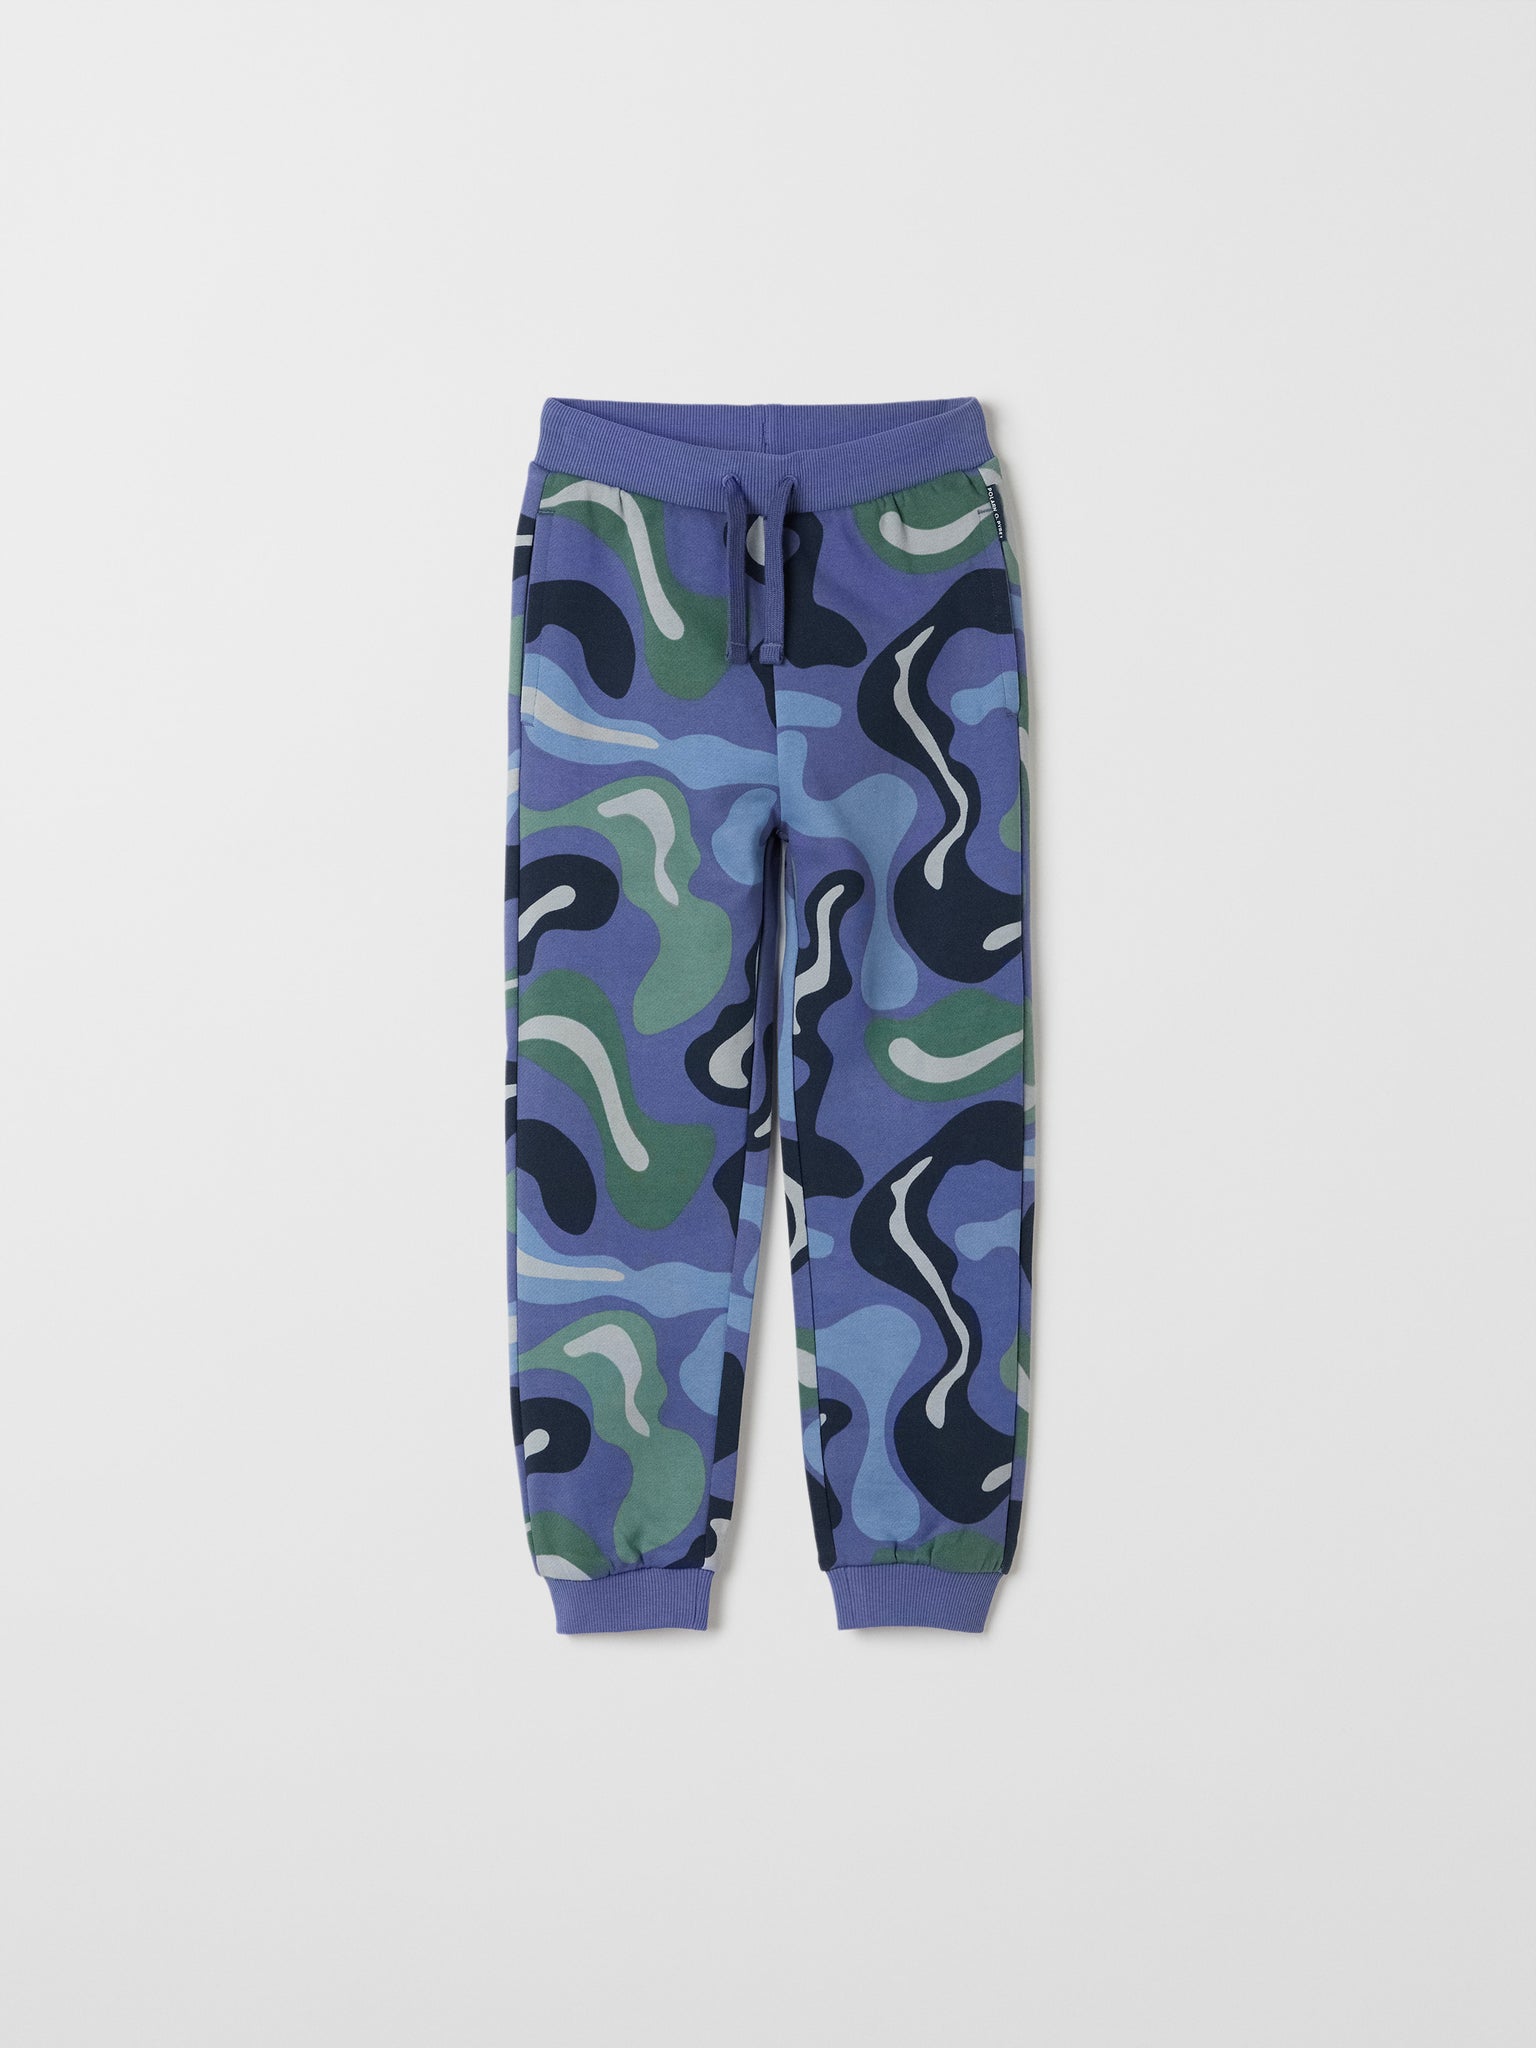 Organic Cotton Kids Blue Joggers from the Polarn O. Pyret kids collection. Made using 100% GOTS Organic Cotton